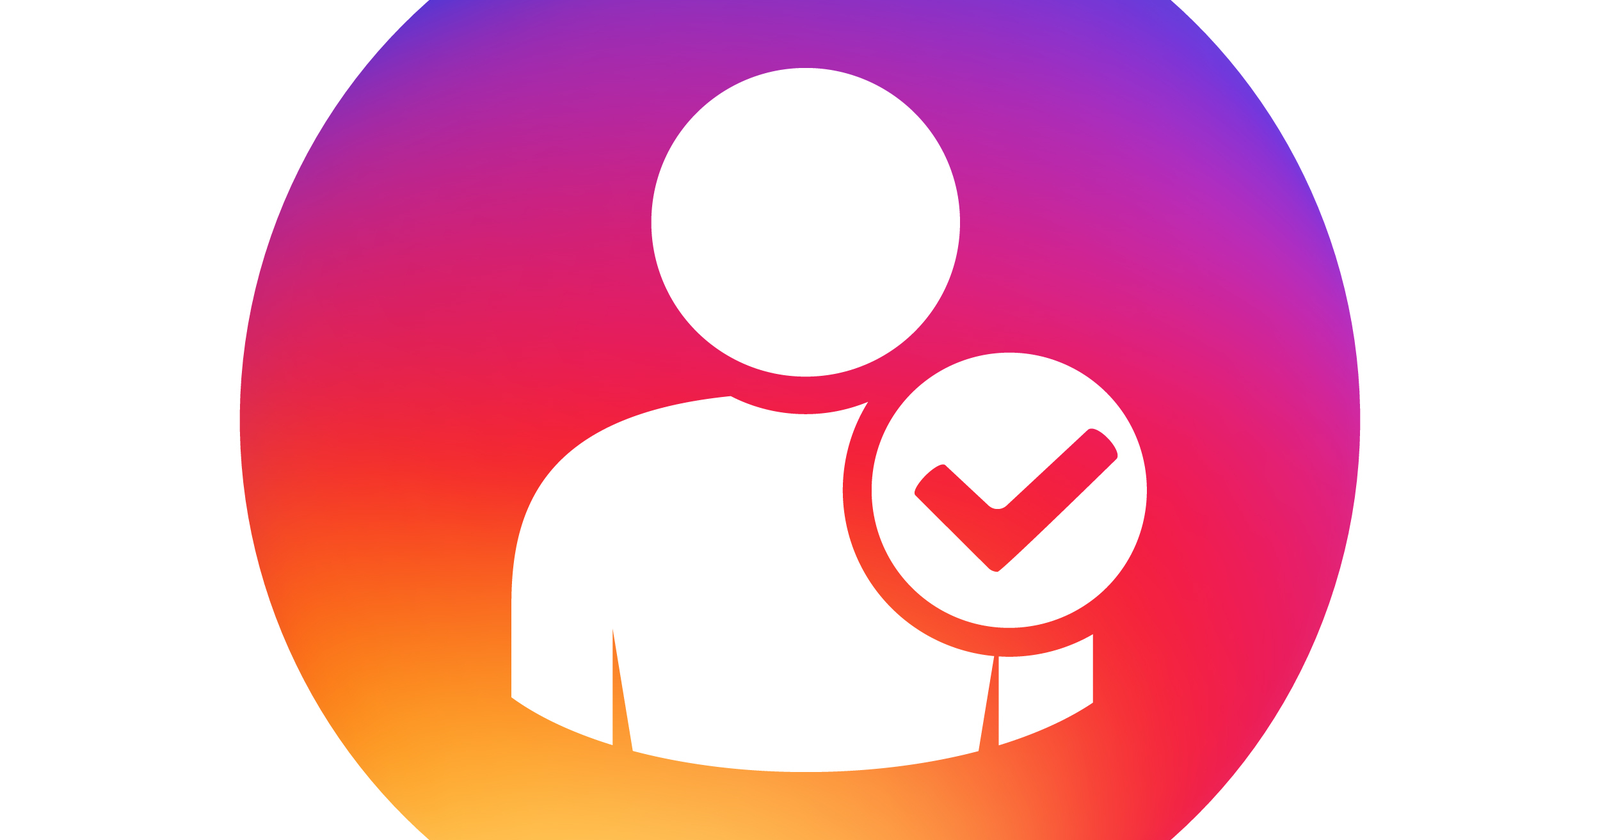 instagram lets users apply to become verified - instagram users need to be careful about verification badge emails